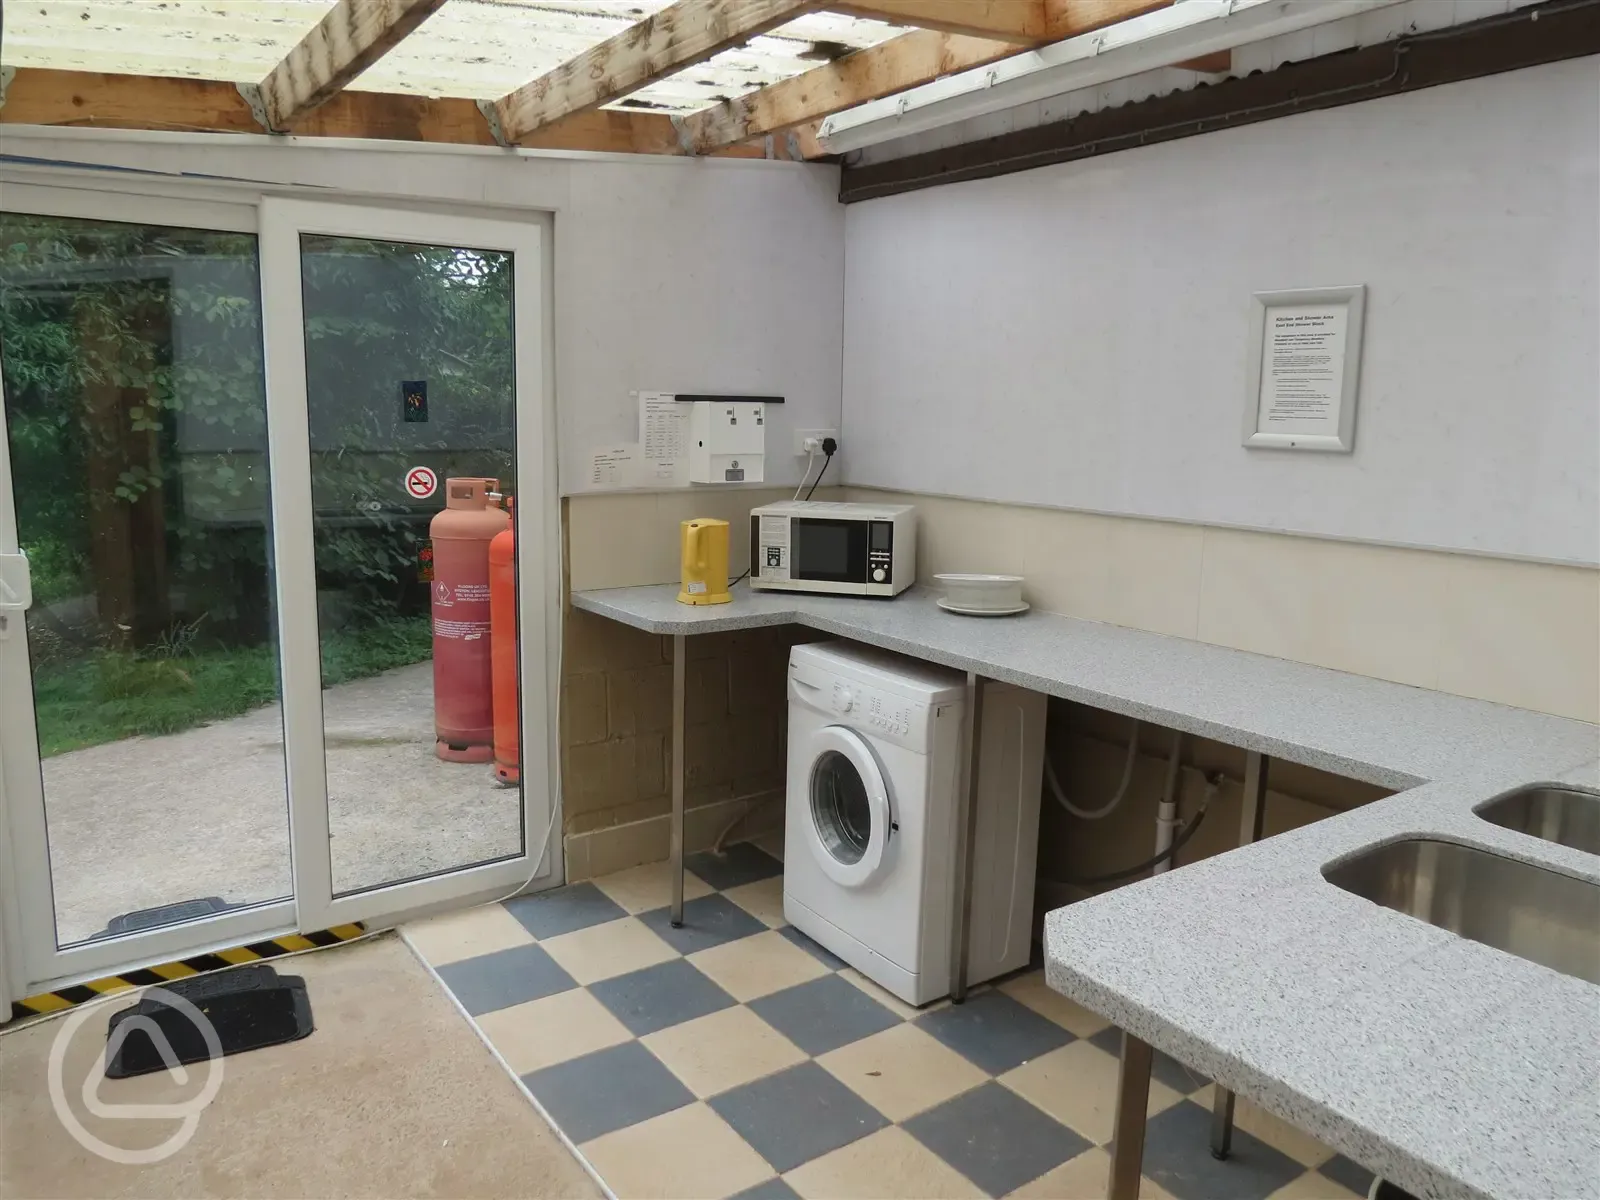 Kitchen and Washing Area